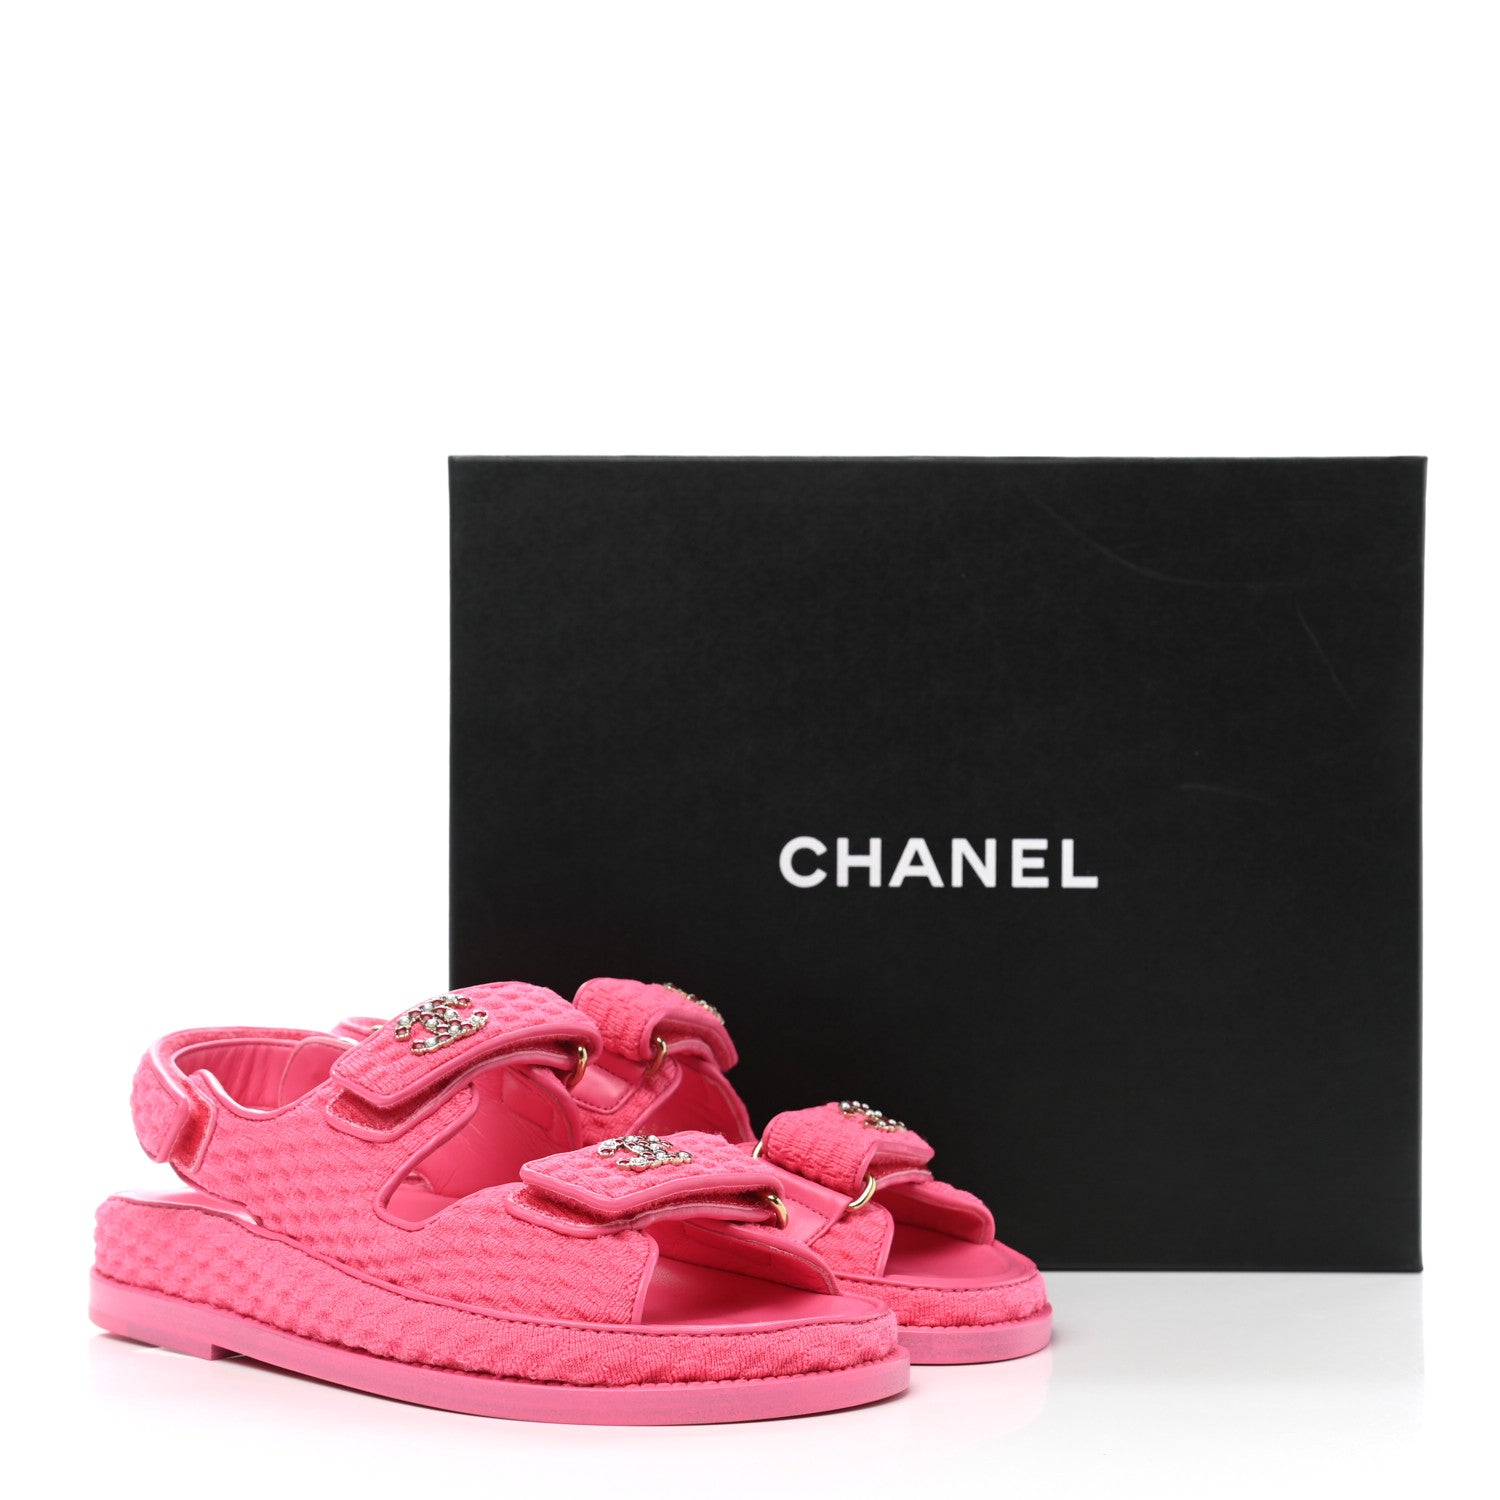 CHANEL, Shoes, Chanel Pink Tweed Sandals